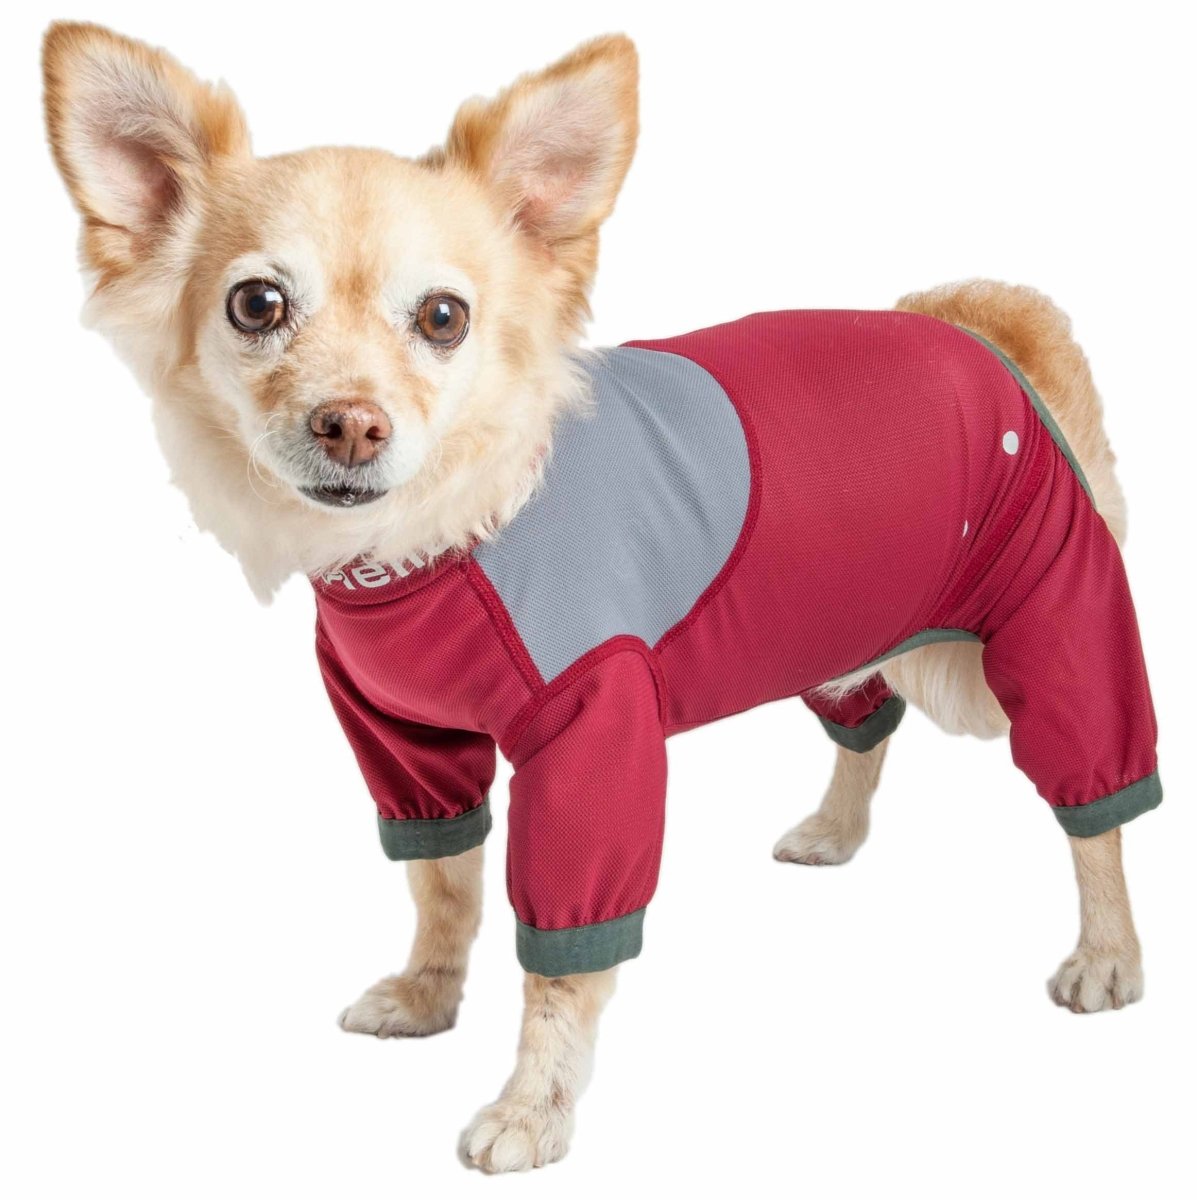 Yghl9rdlg Tail Runner 4-way-stretch Breathable Full Bodied Performance Dog Track Suit - Red & Grey, Large